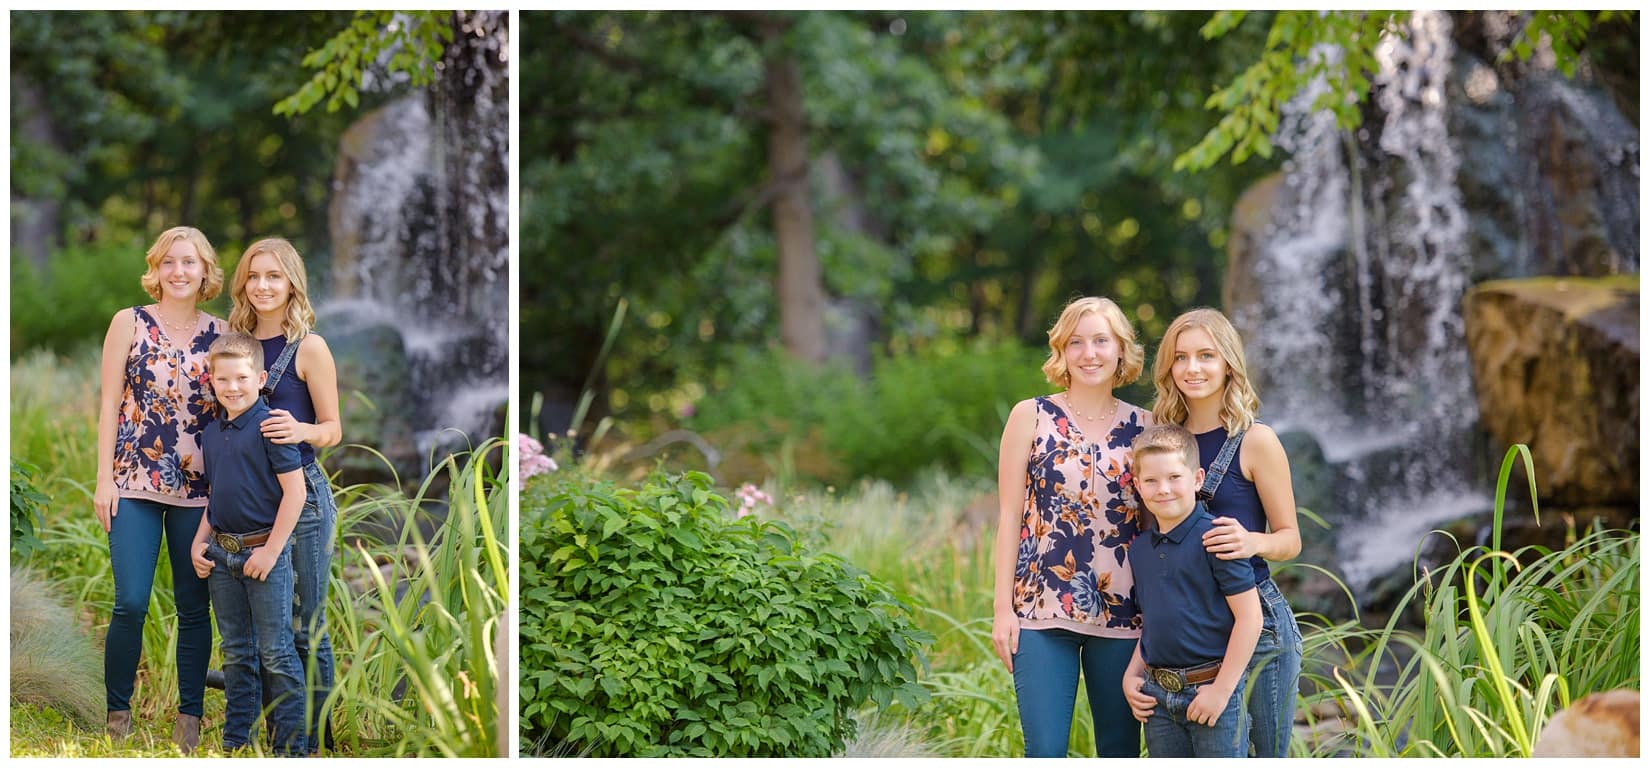 Boise family stands for portraits. Photos by Tiffany Hix Photography.